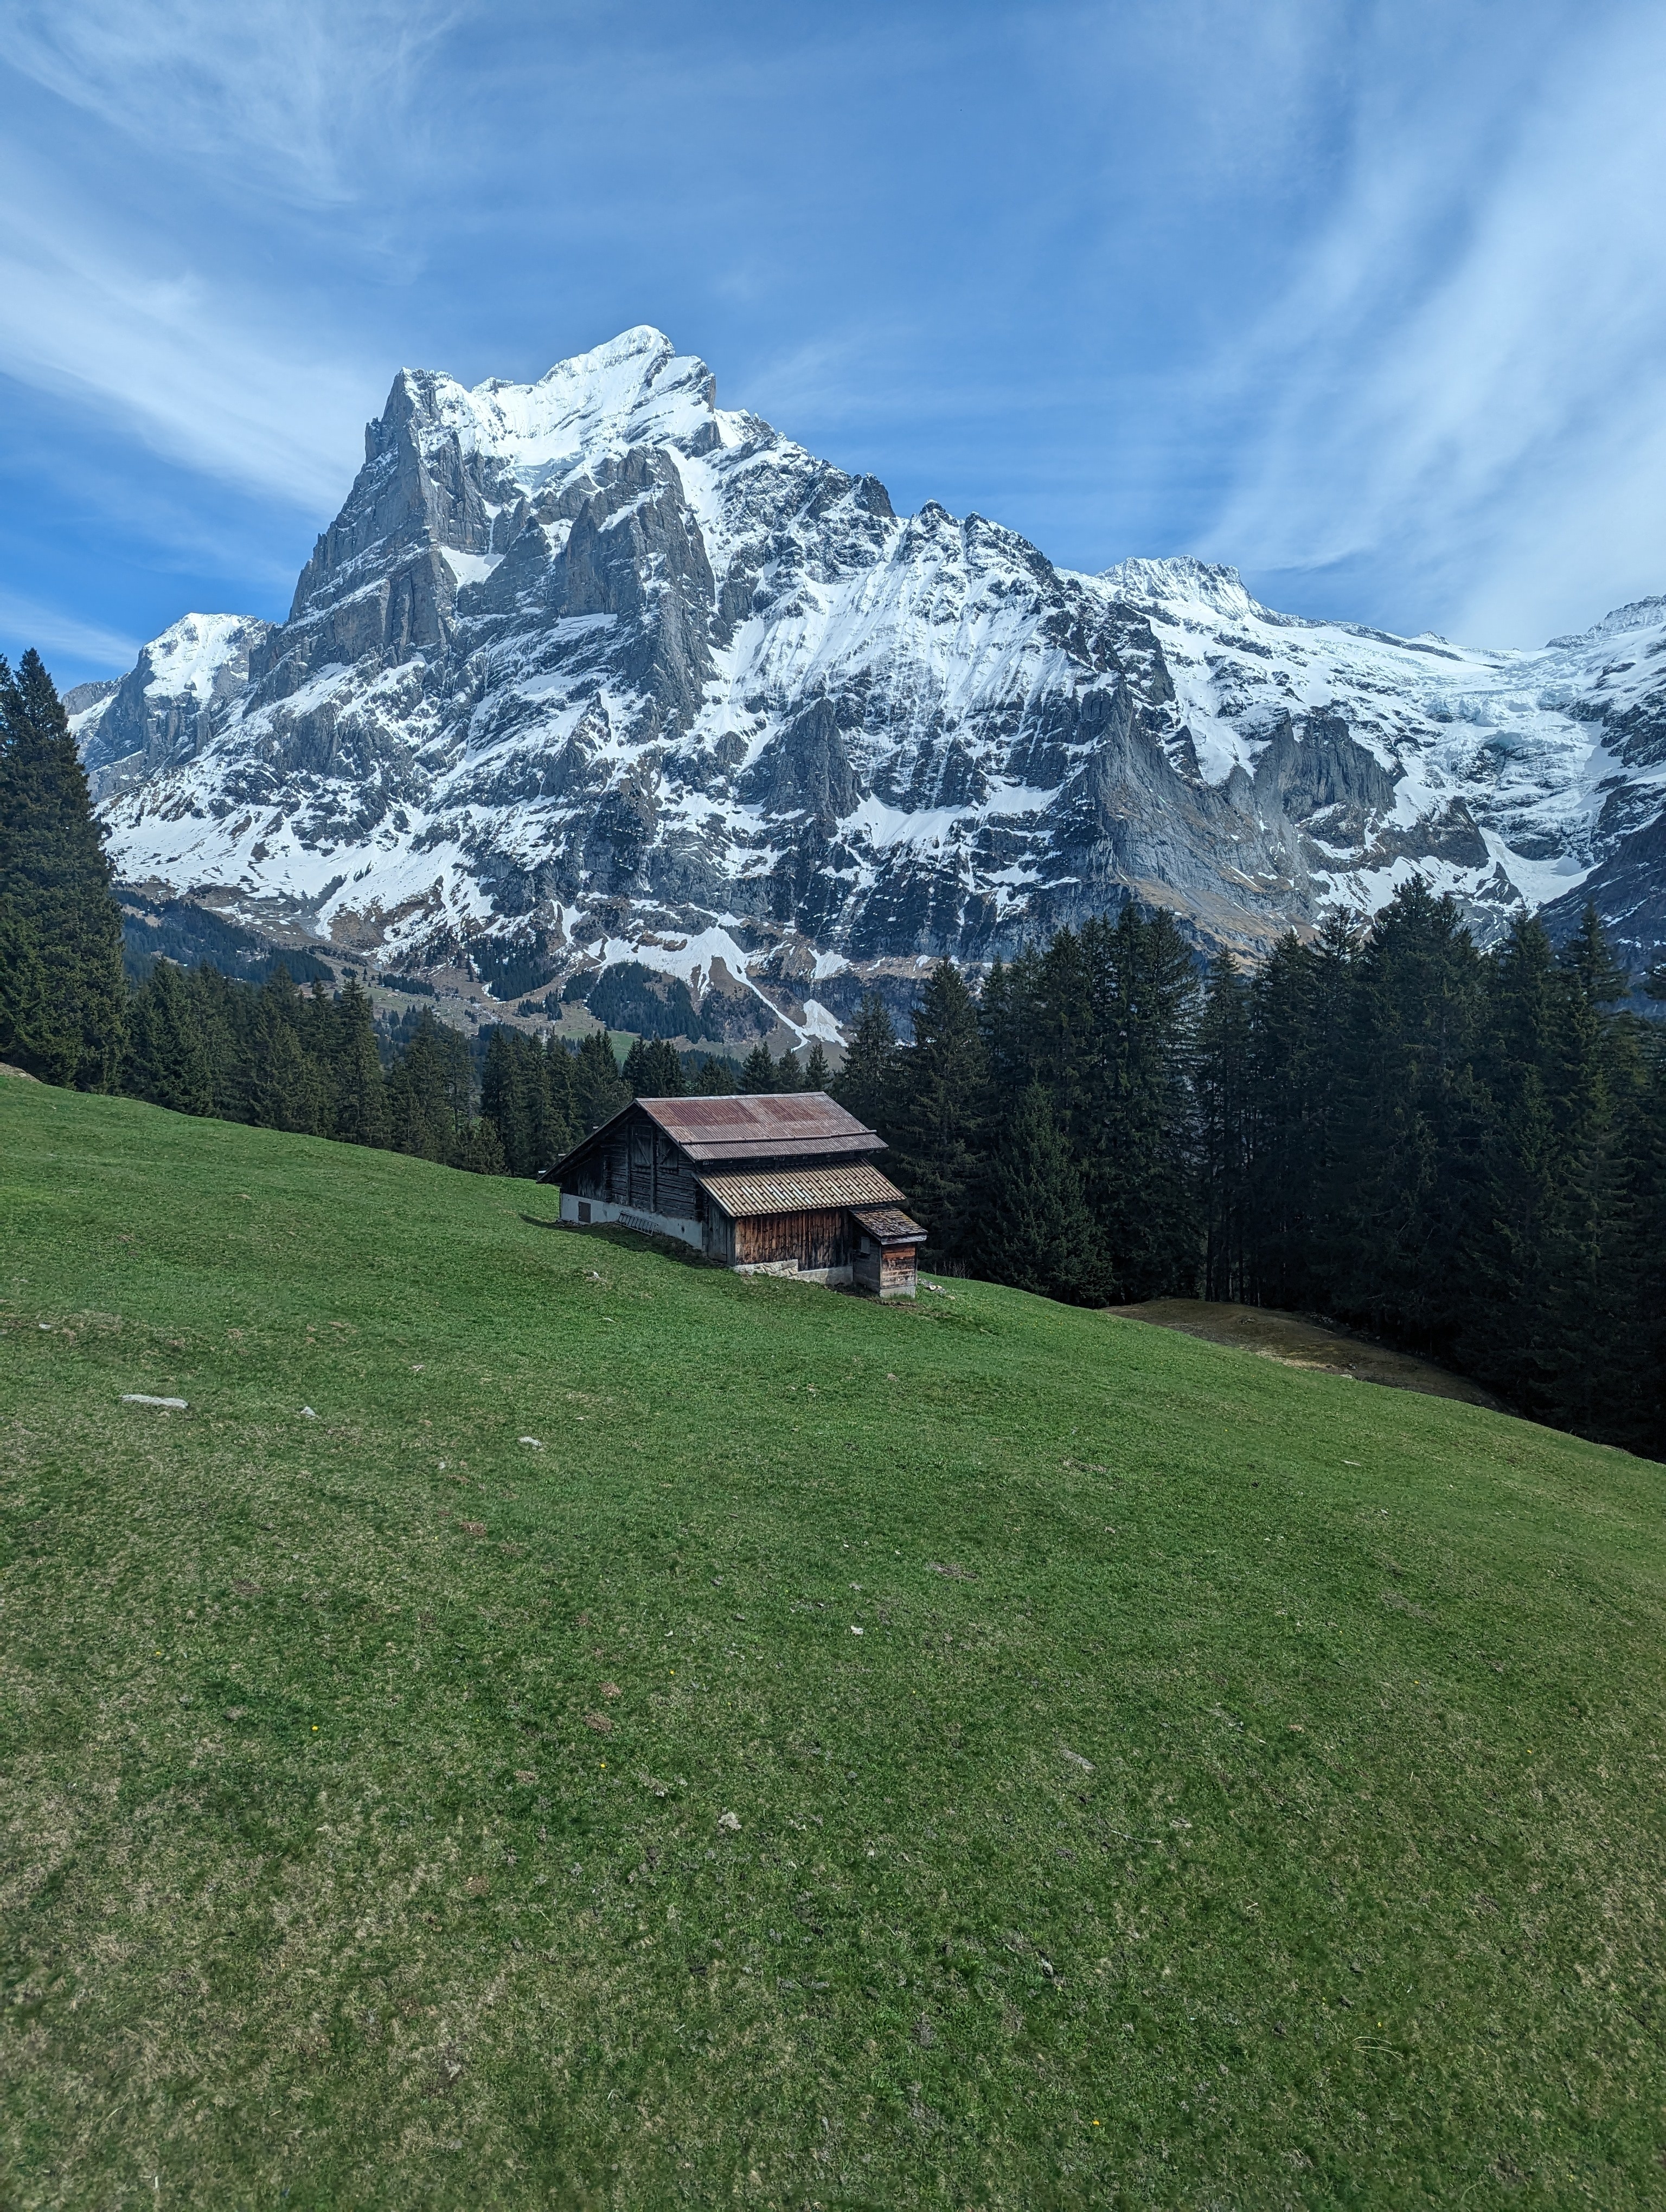 Wetterhorn with grass, trees, and cabin in foreground